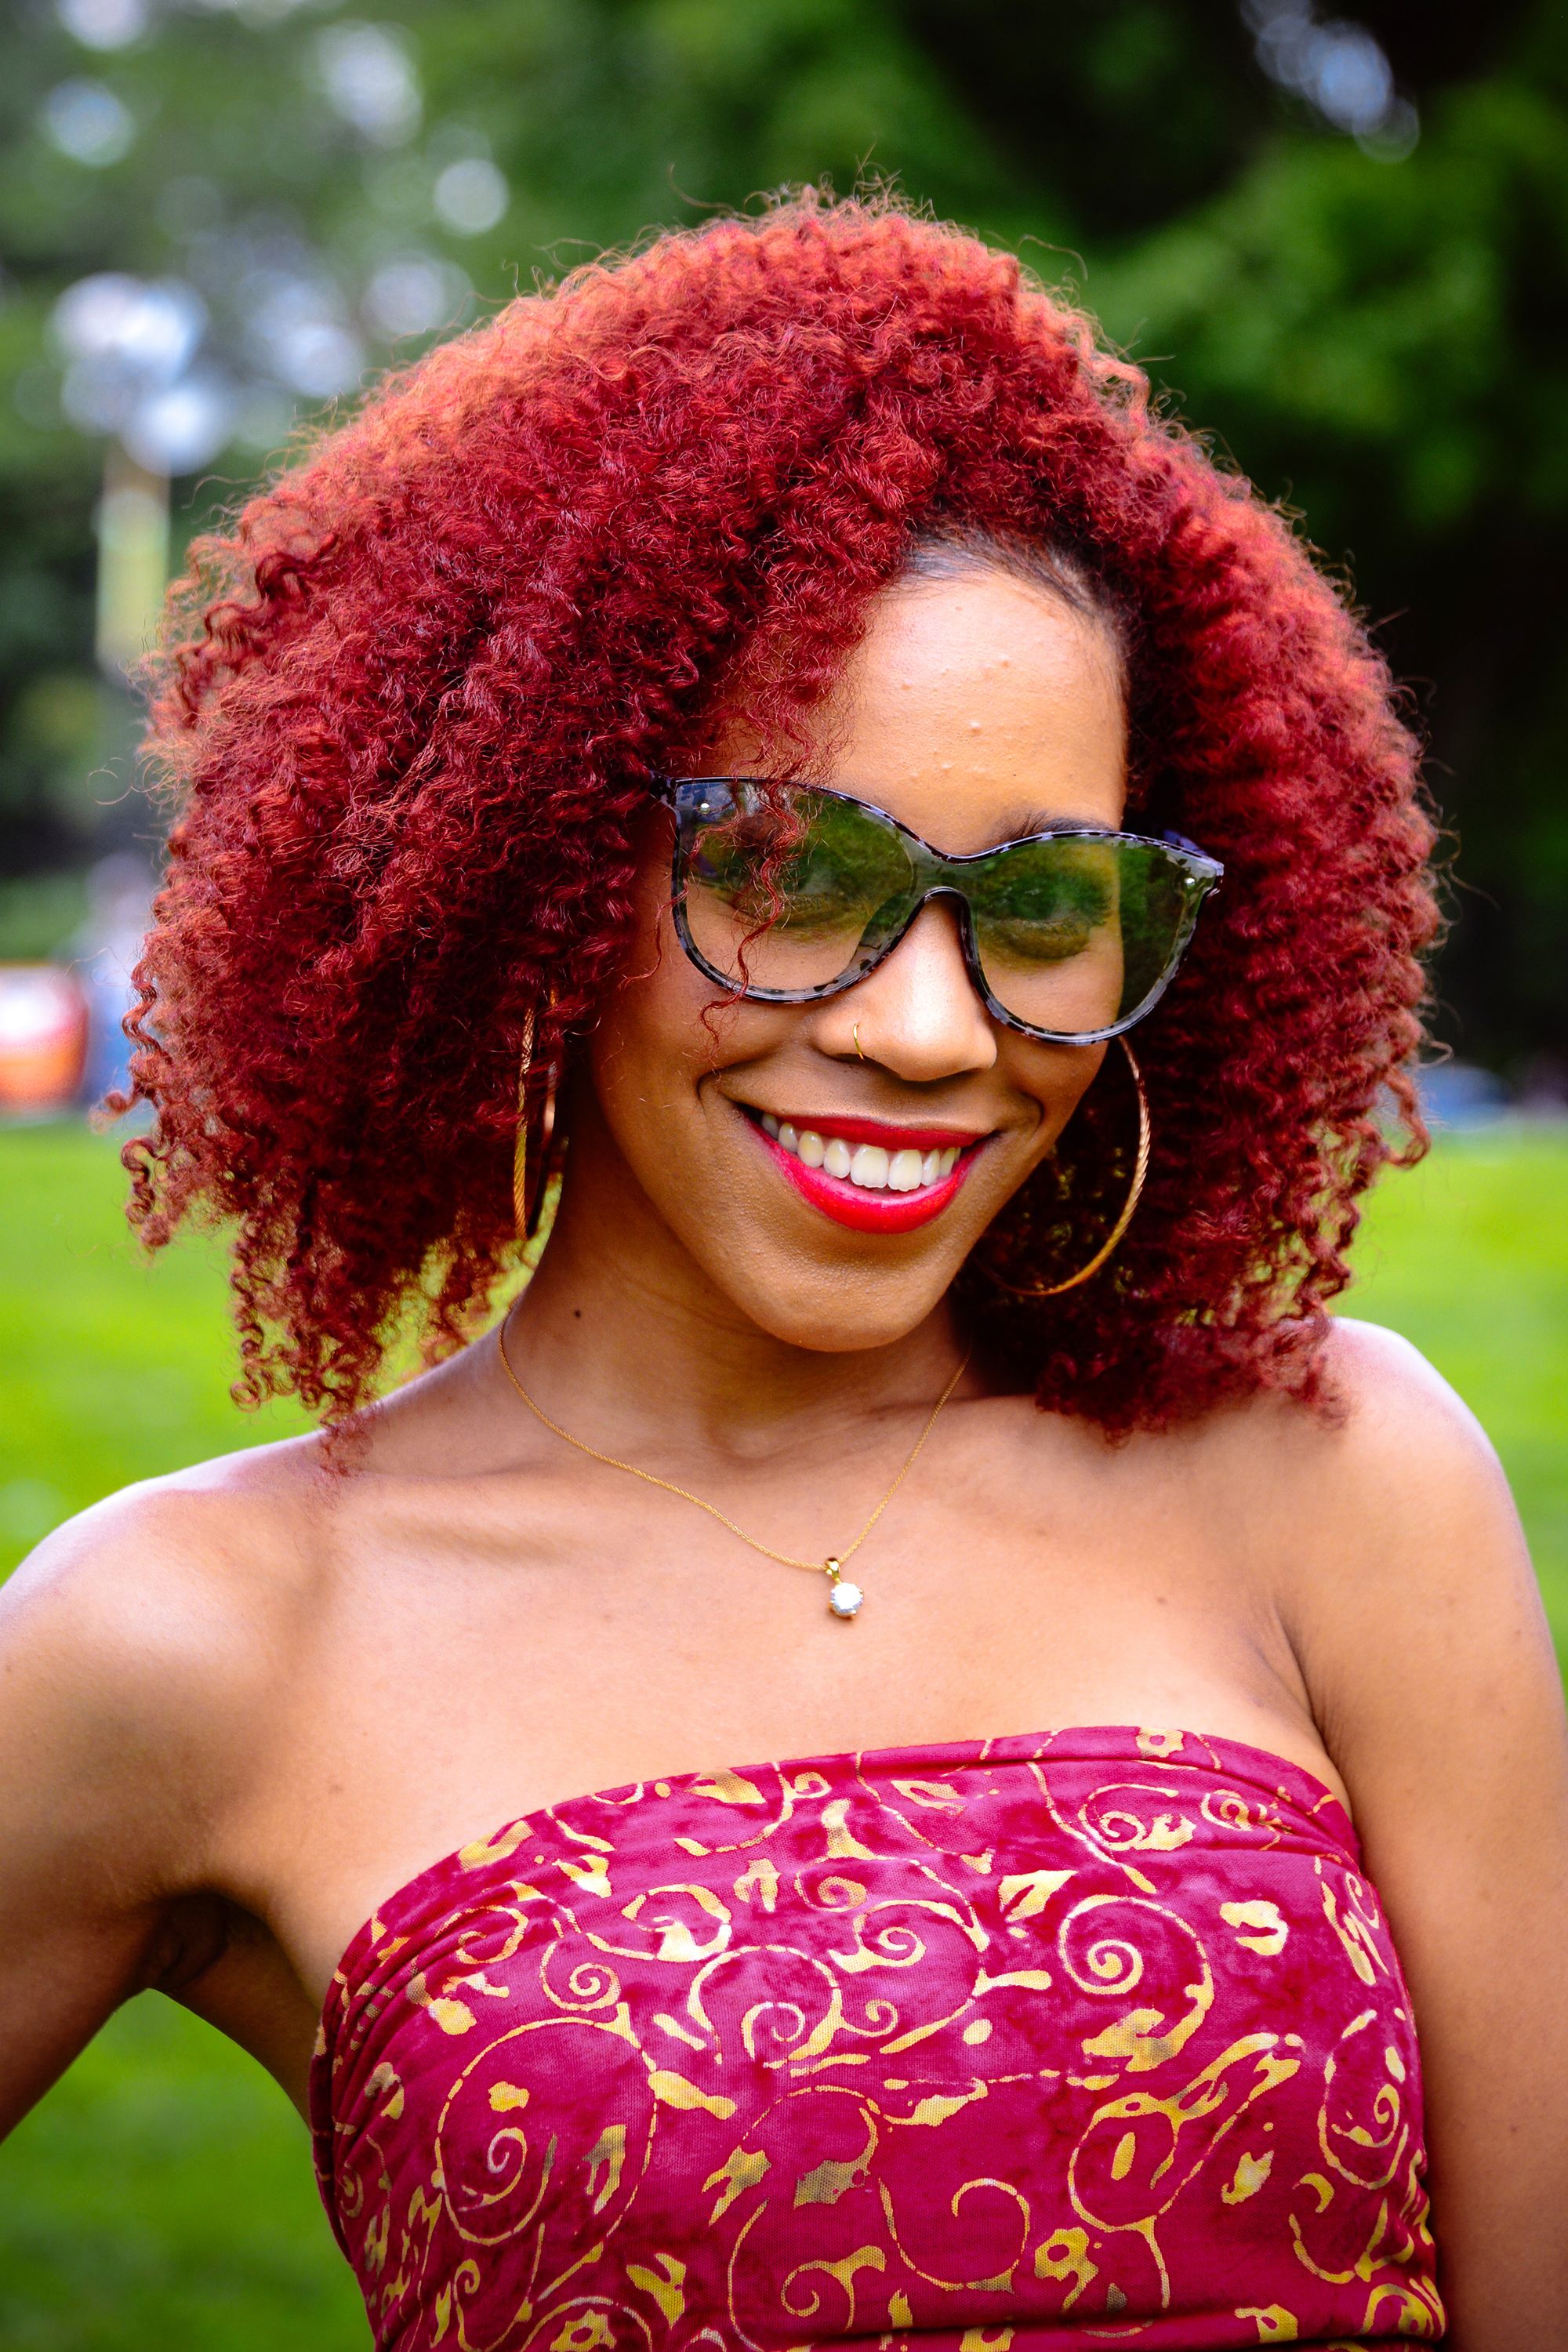 The Biggest Hair Trend At Curlfest Had Nothing to Do With Curls